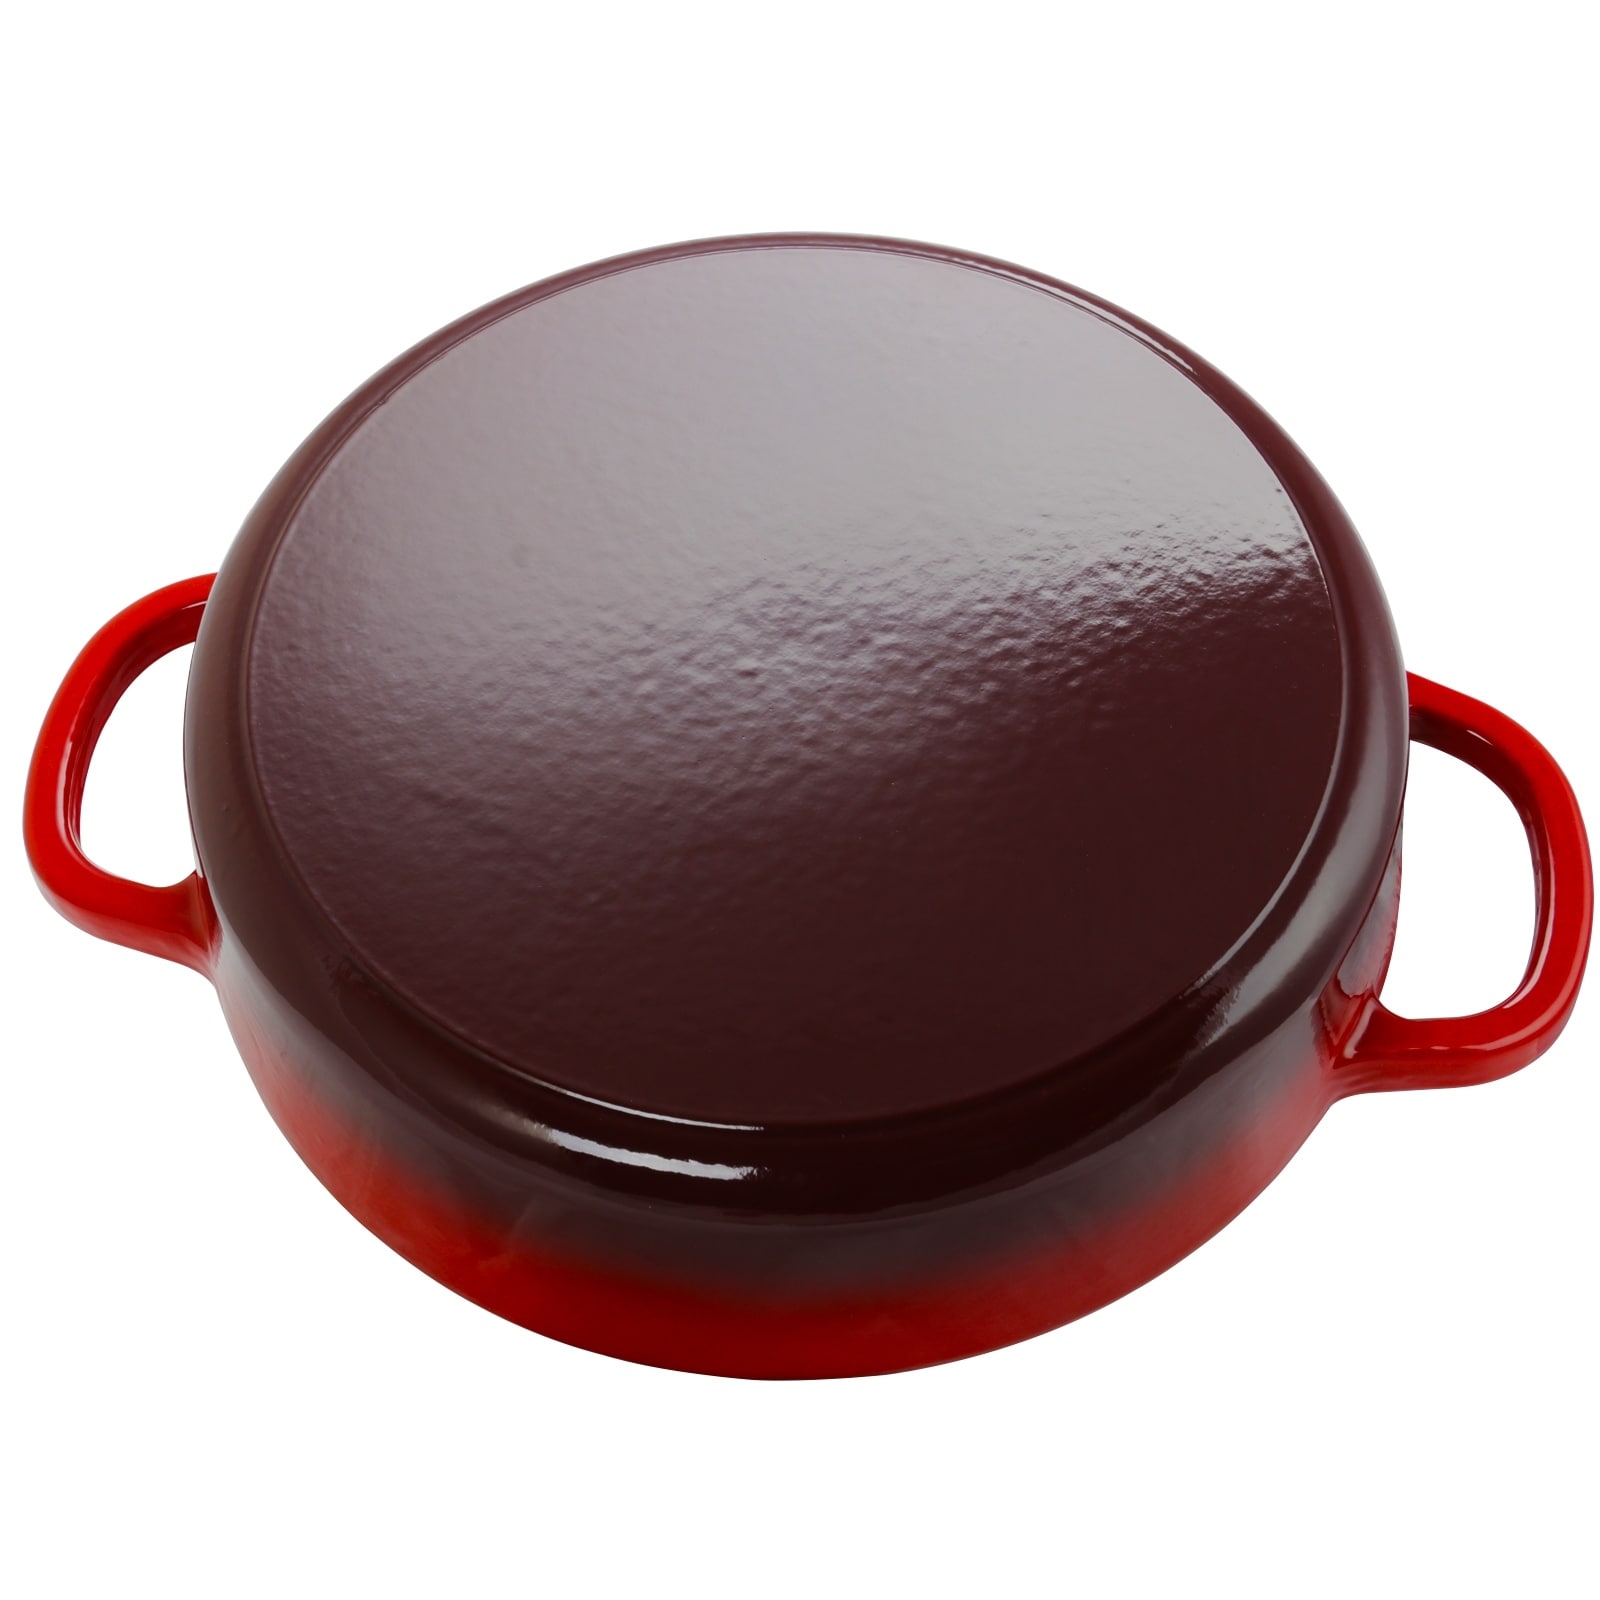 https://ak1.ostkcdn.com/images/products/is/images/direct/b706514437f4b55e7a1c98f903cdc71a6a5584bc/Crock-Pot-Artisan-Enameled-Cast-Iron-5-Quart-Round-Braiser-Pan-with-Self-Basting-Lid-in-Scarlet-Red.jpg